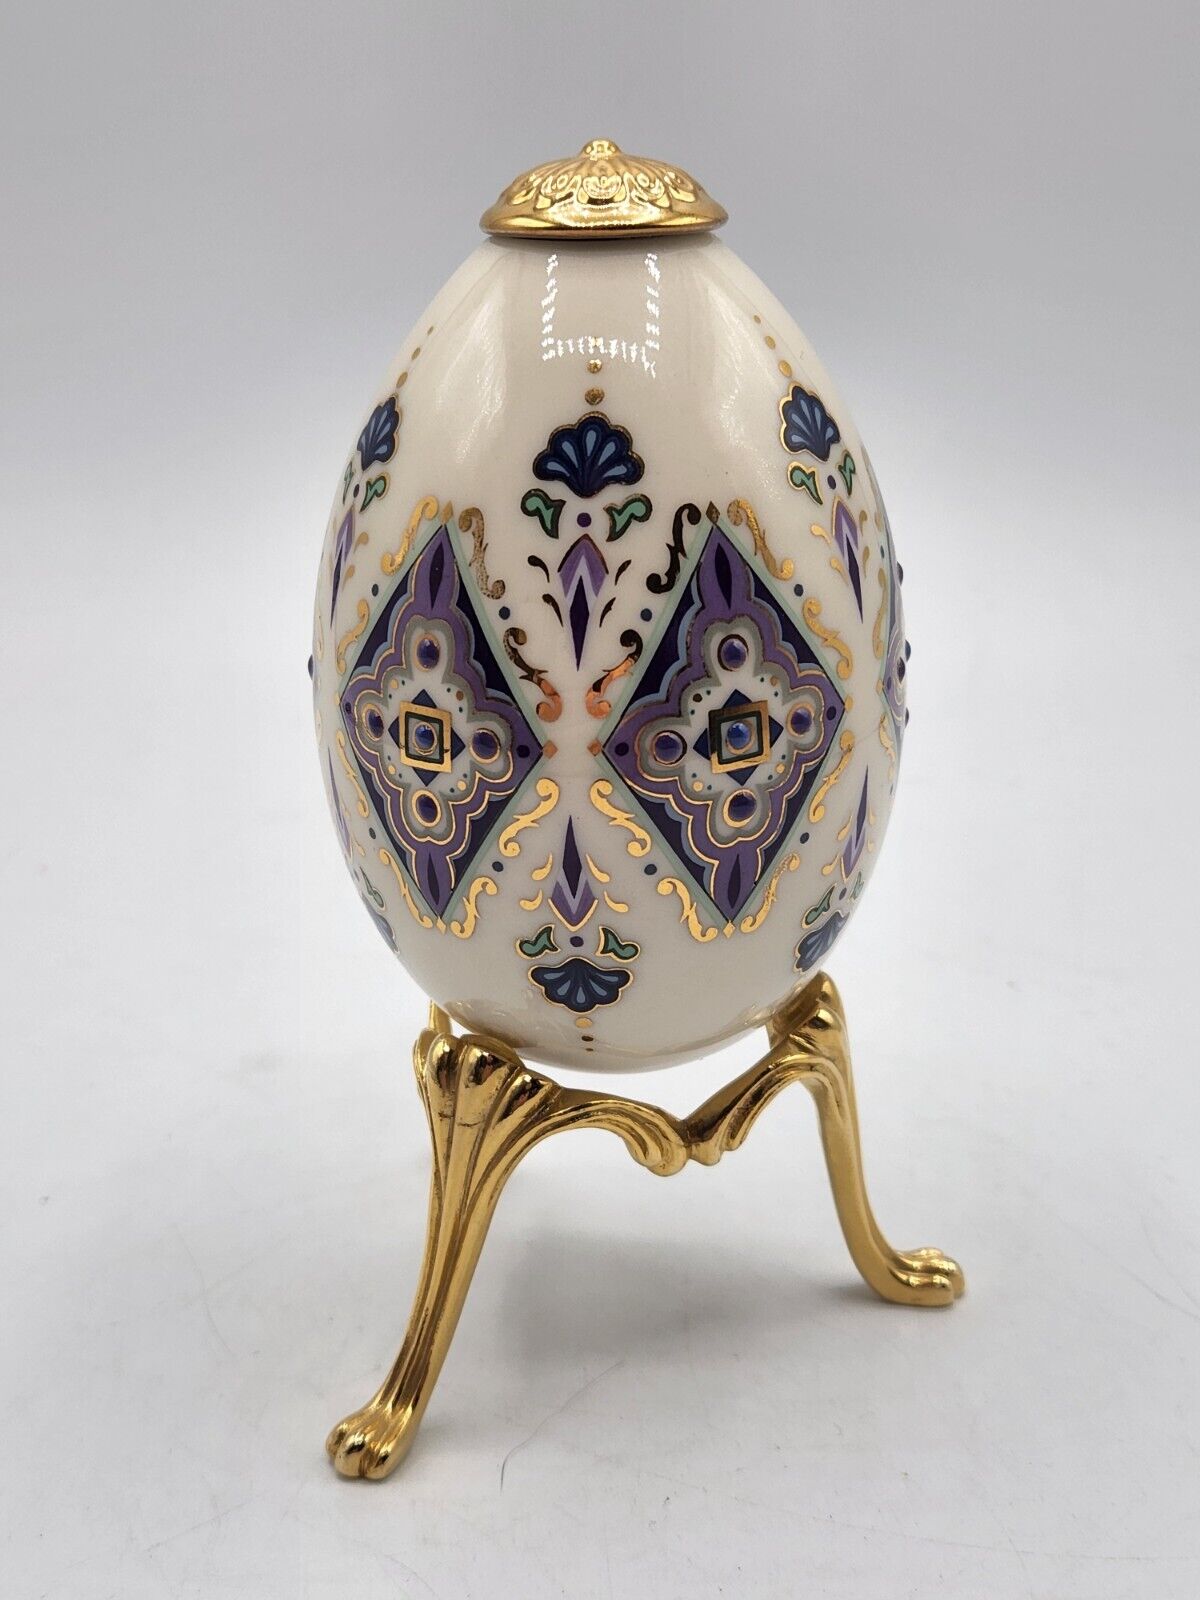 Lenox China Treasures Amethyst Porcelain Egg and Gold Stand 1994